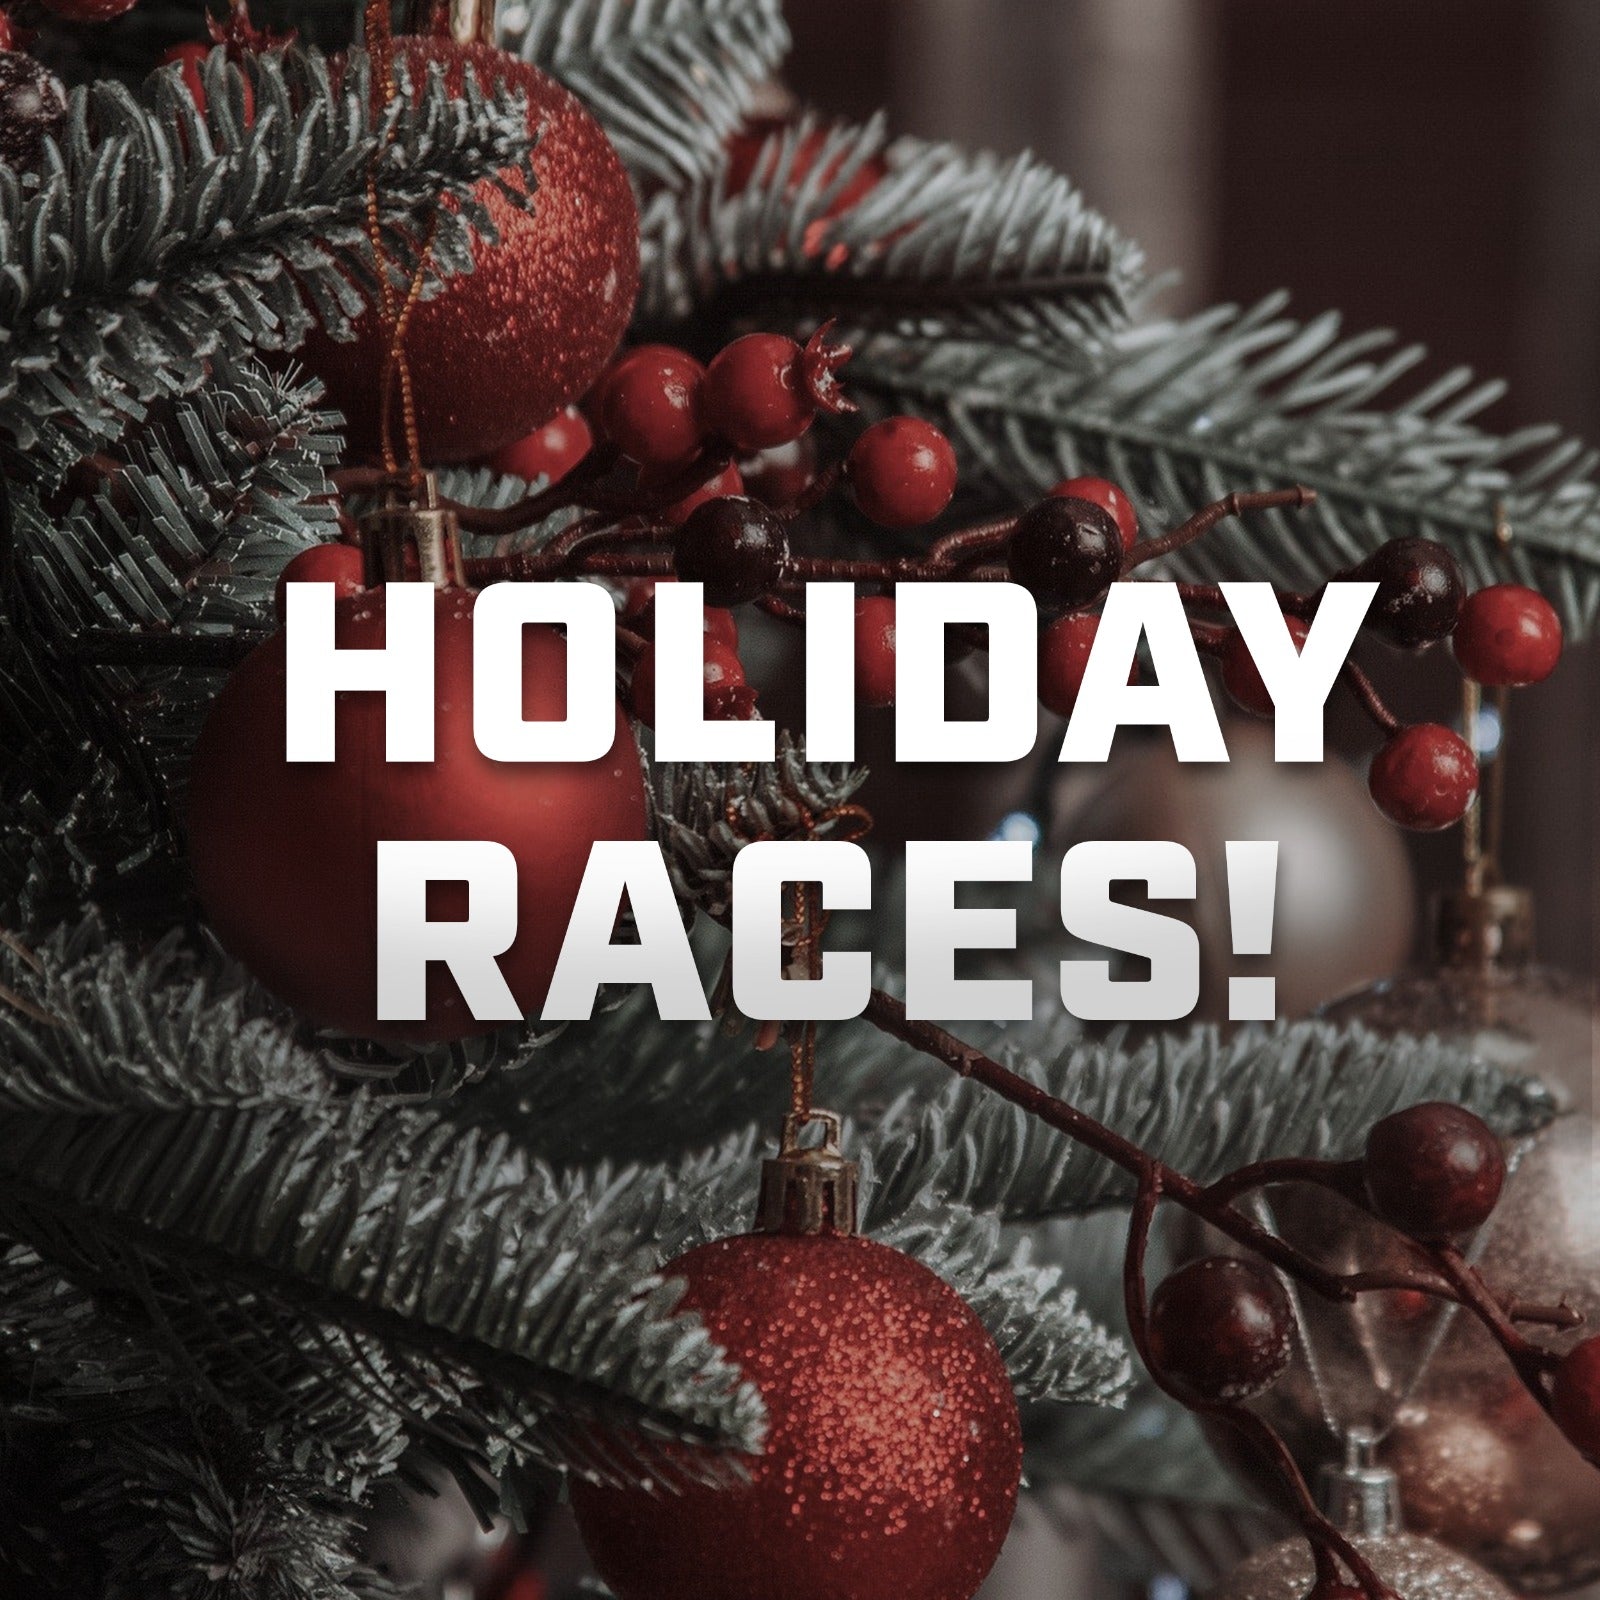 Holiday Races!